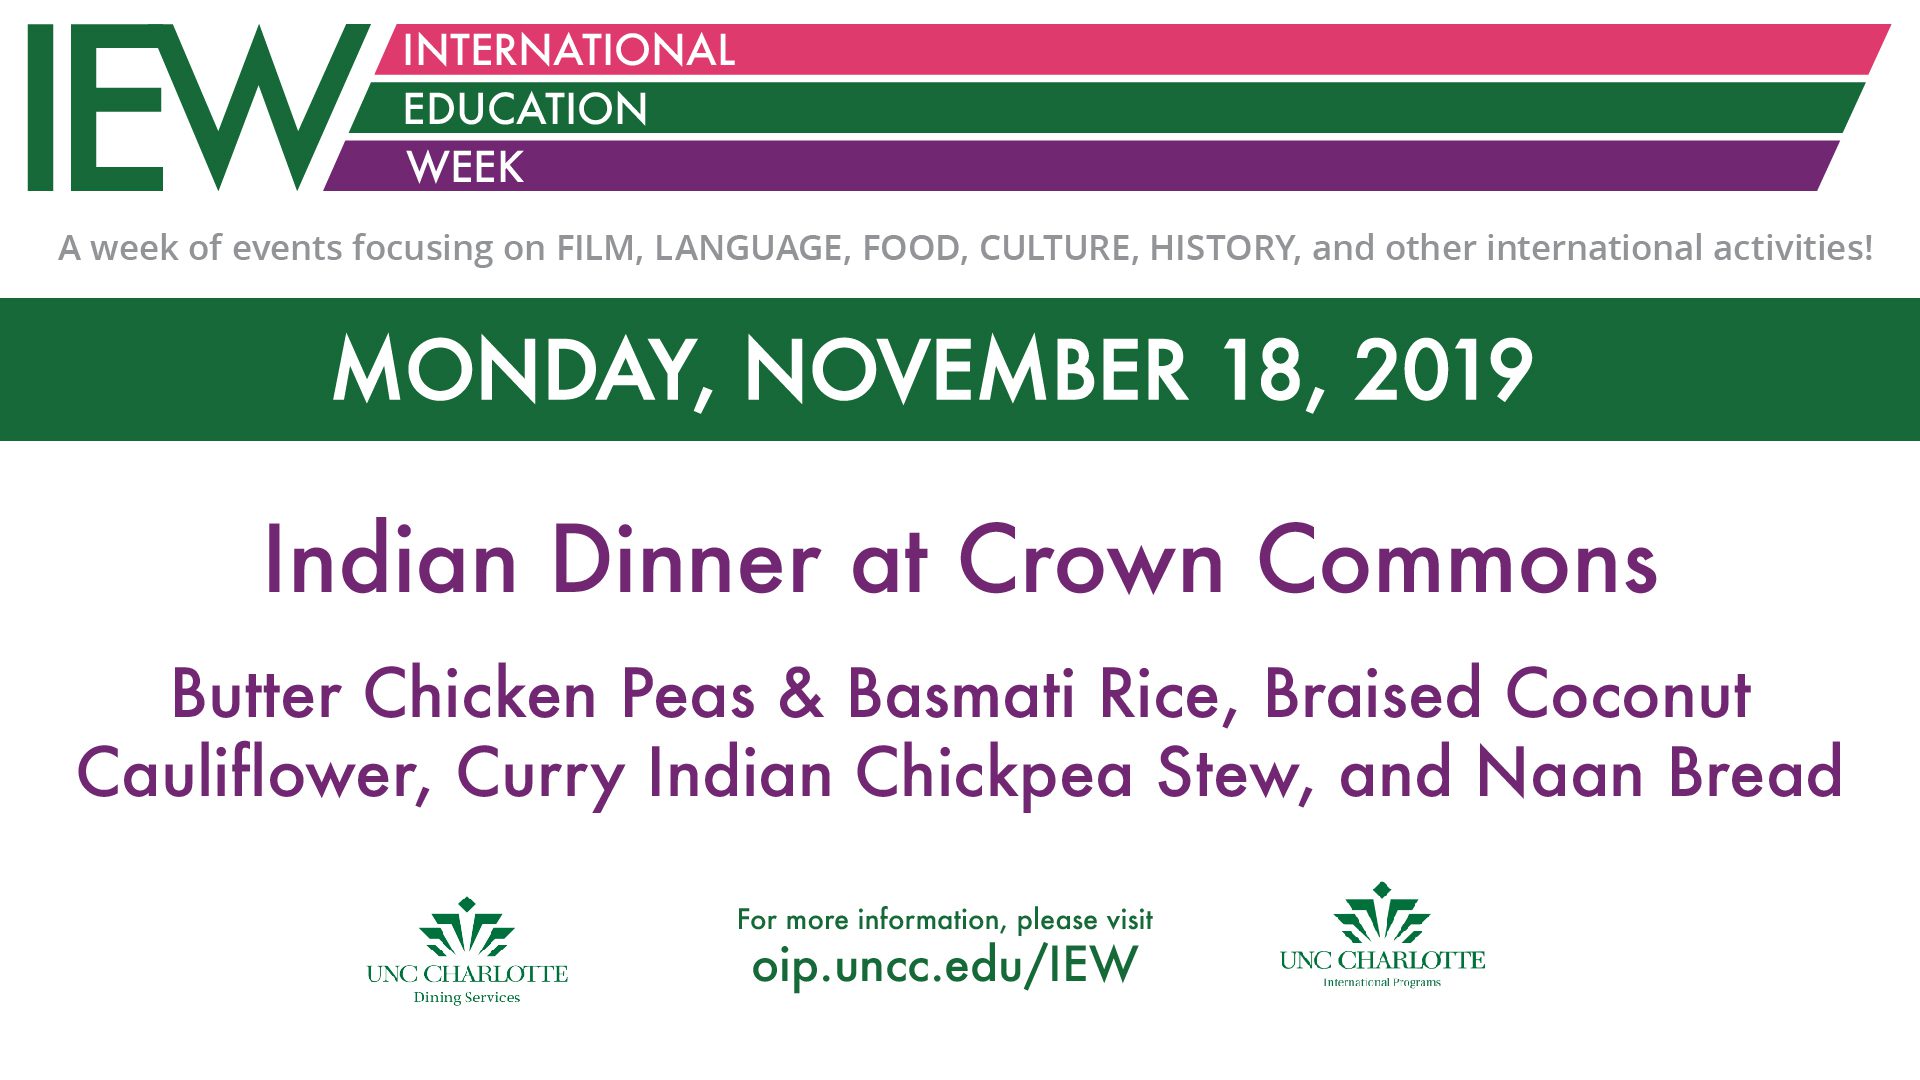 Indian Dinner at Crown Commons